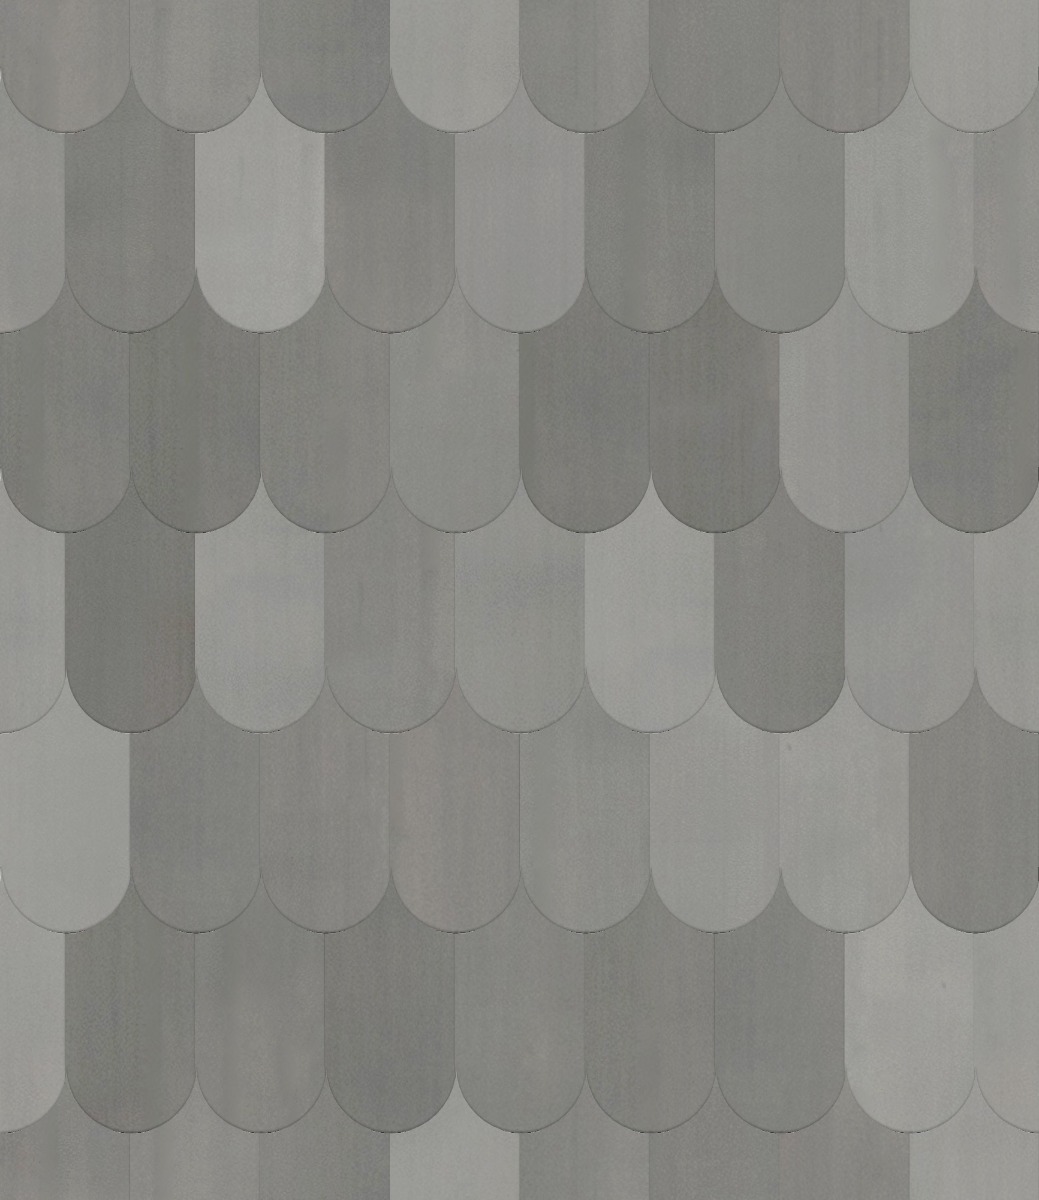 A seamless metal texture with zinc sheets arranged in a Fishscale pattern